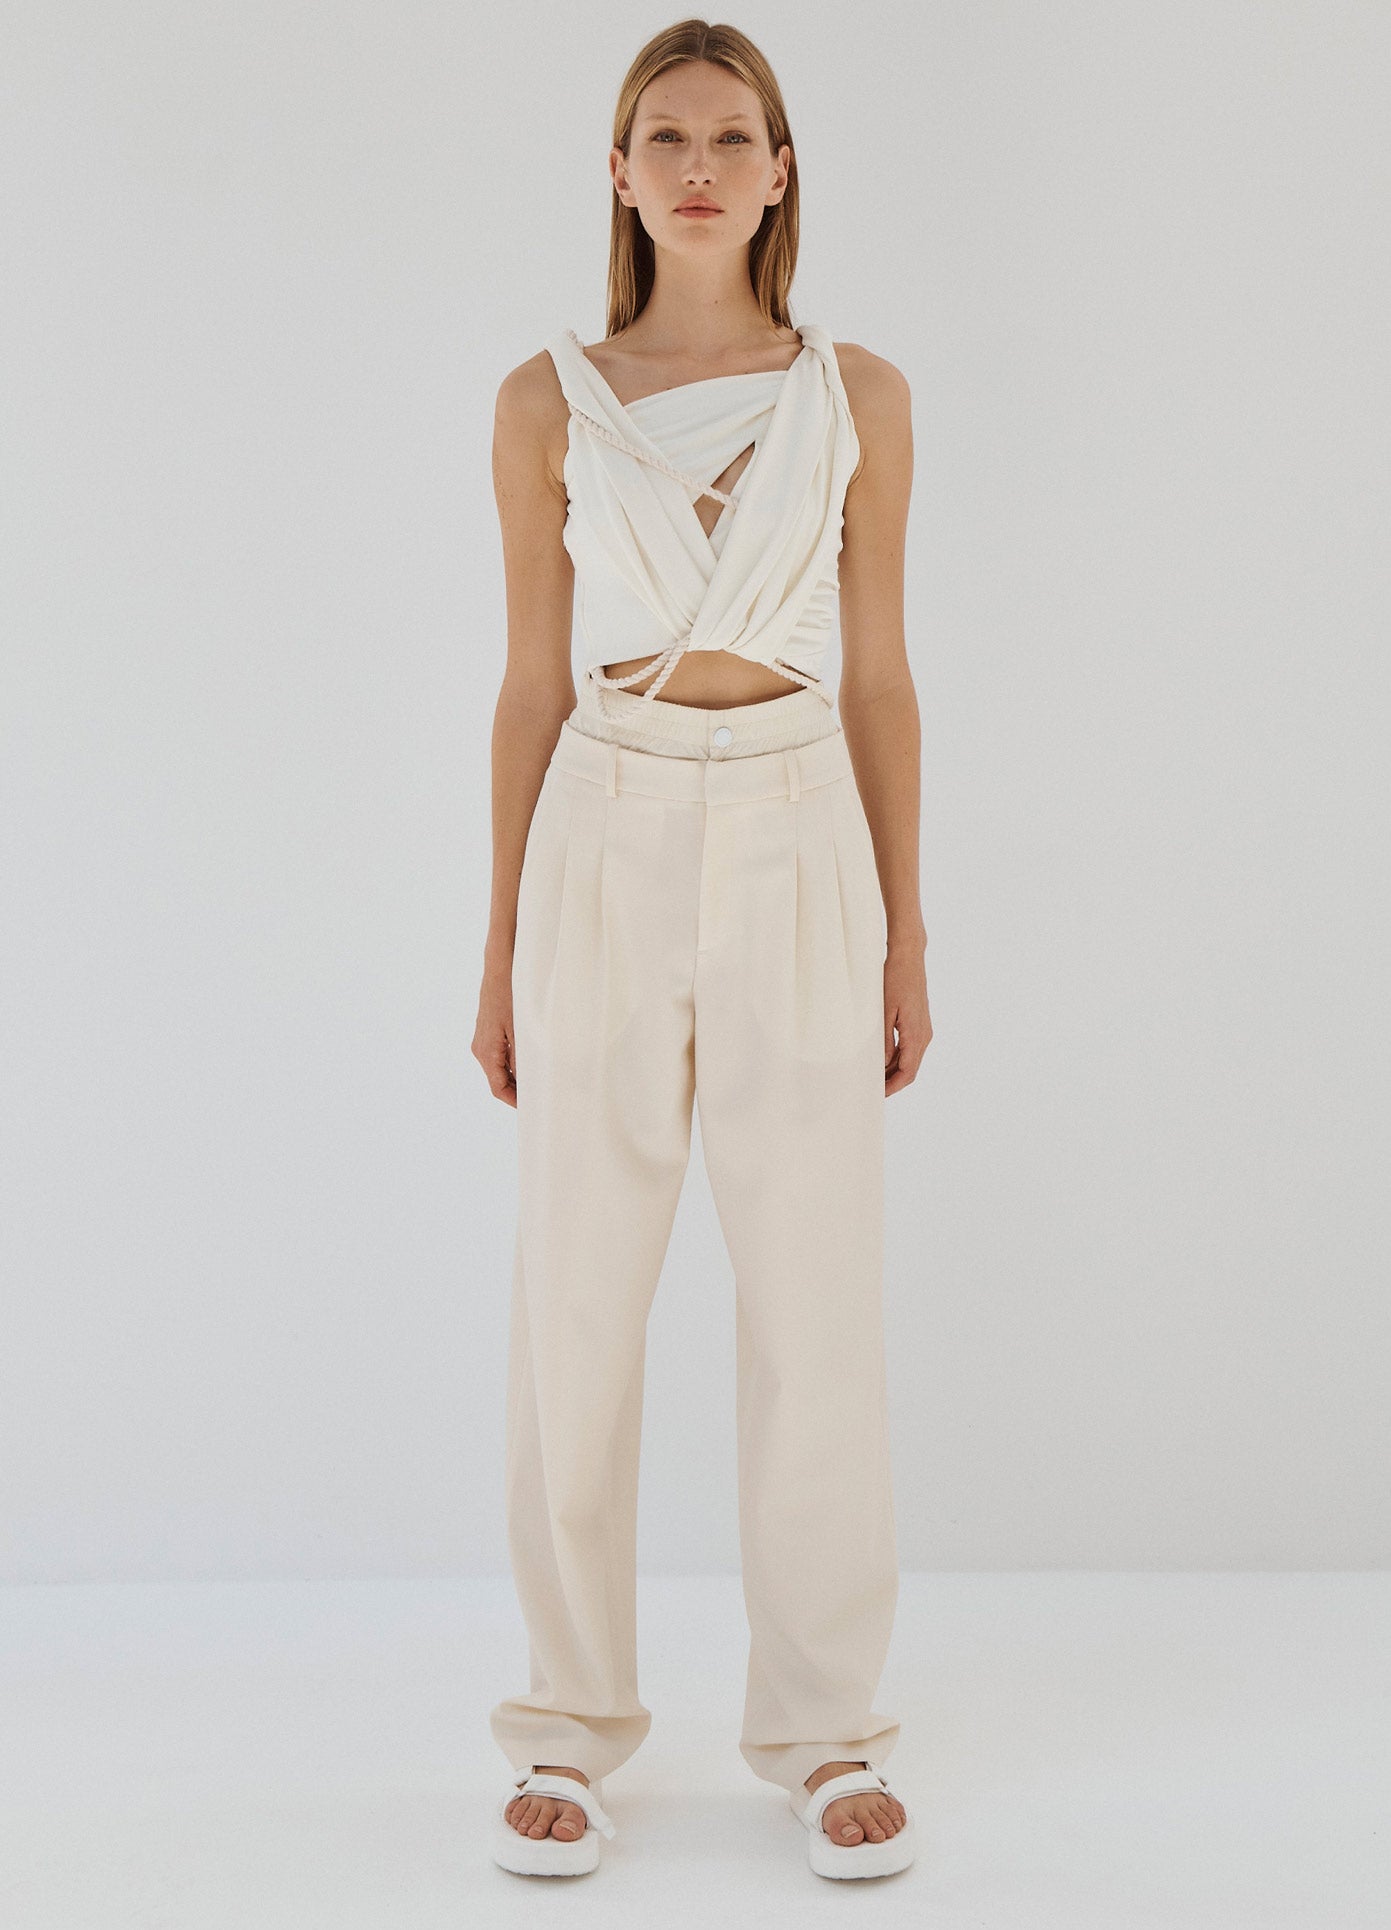 MONSE Double Waistband Trouser in Ivory on Model Full Front View